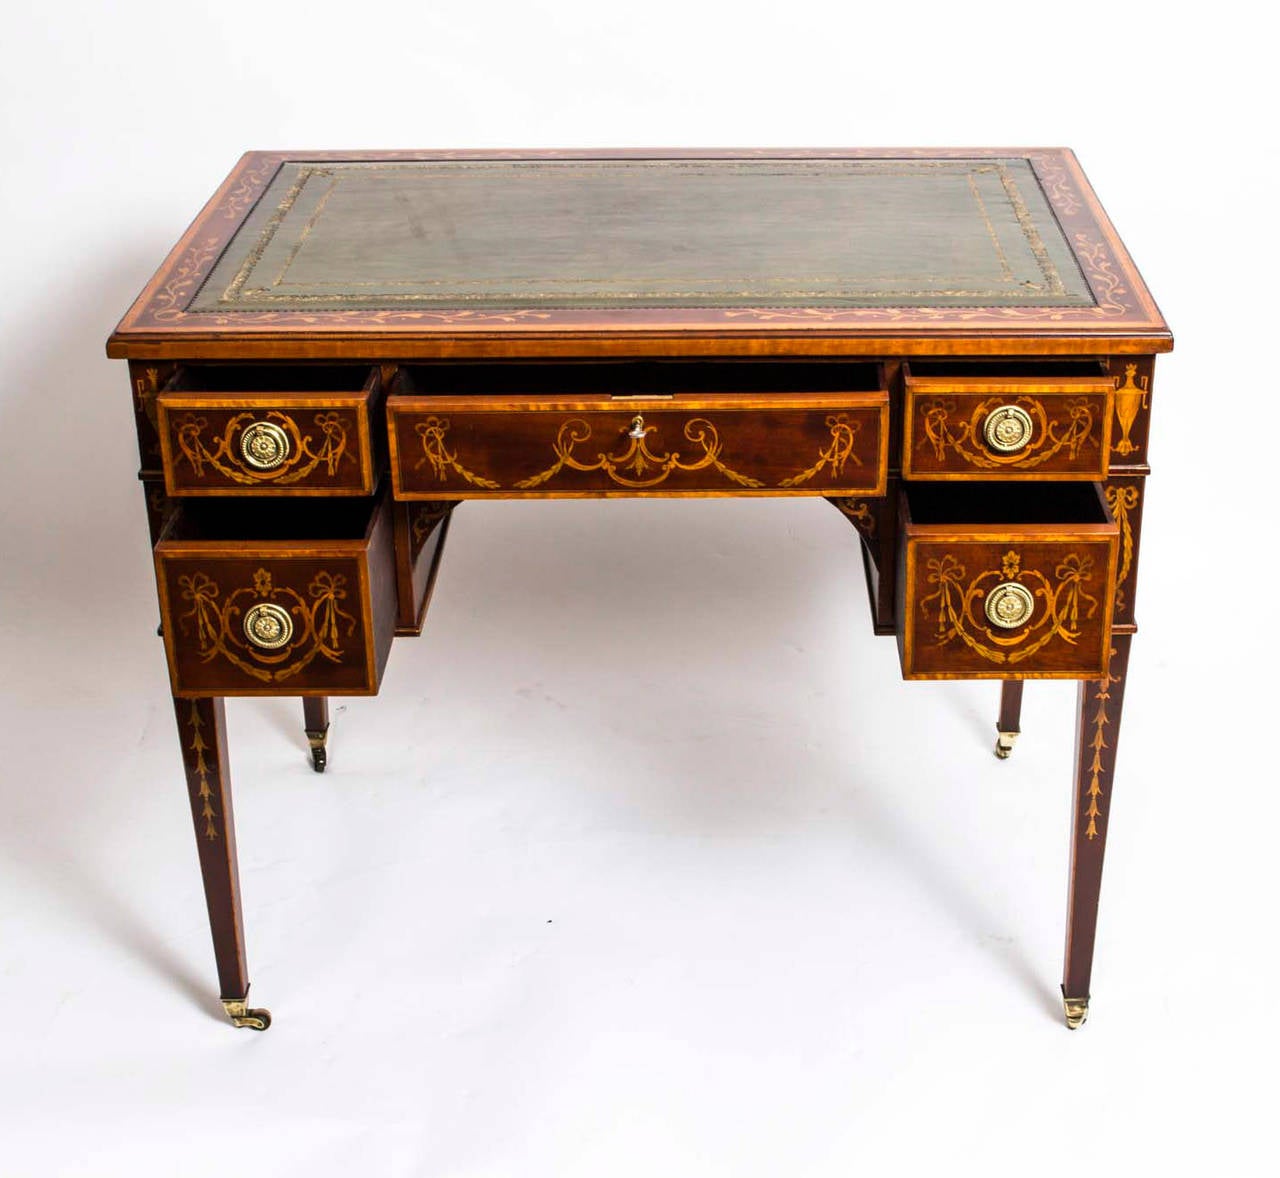 This is a stunning antique writing desk which is crafted from the most beautiful mahogany with fabulous inlaid marquetry decoration, circa 1900 in date. 

It has been wonderfully inlaid by a master craftsman and the quality of the work is